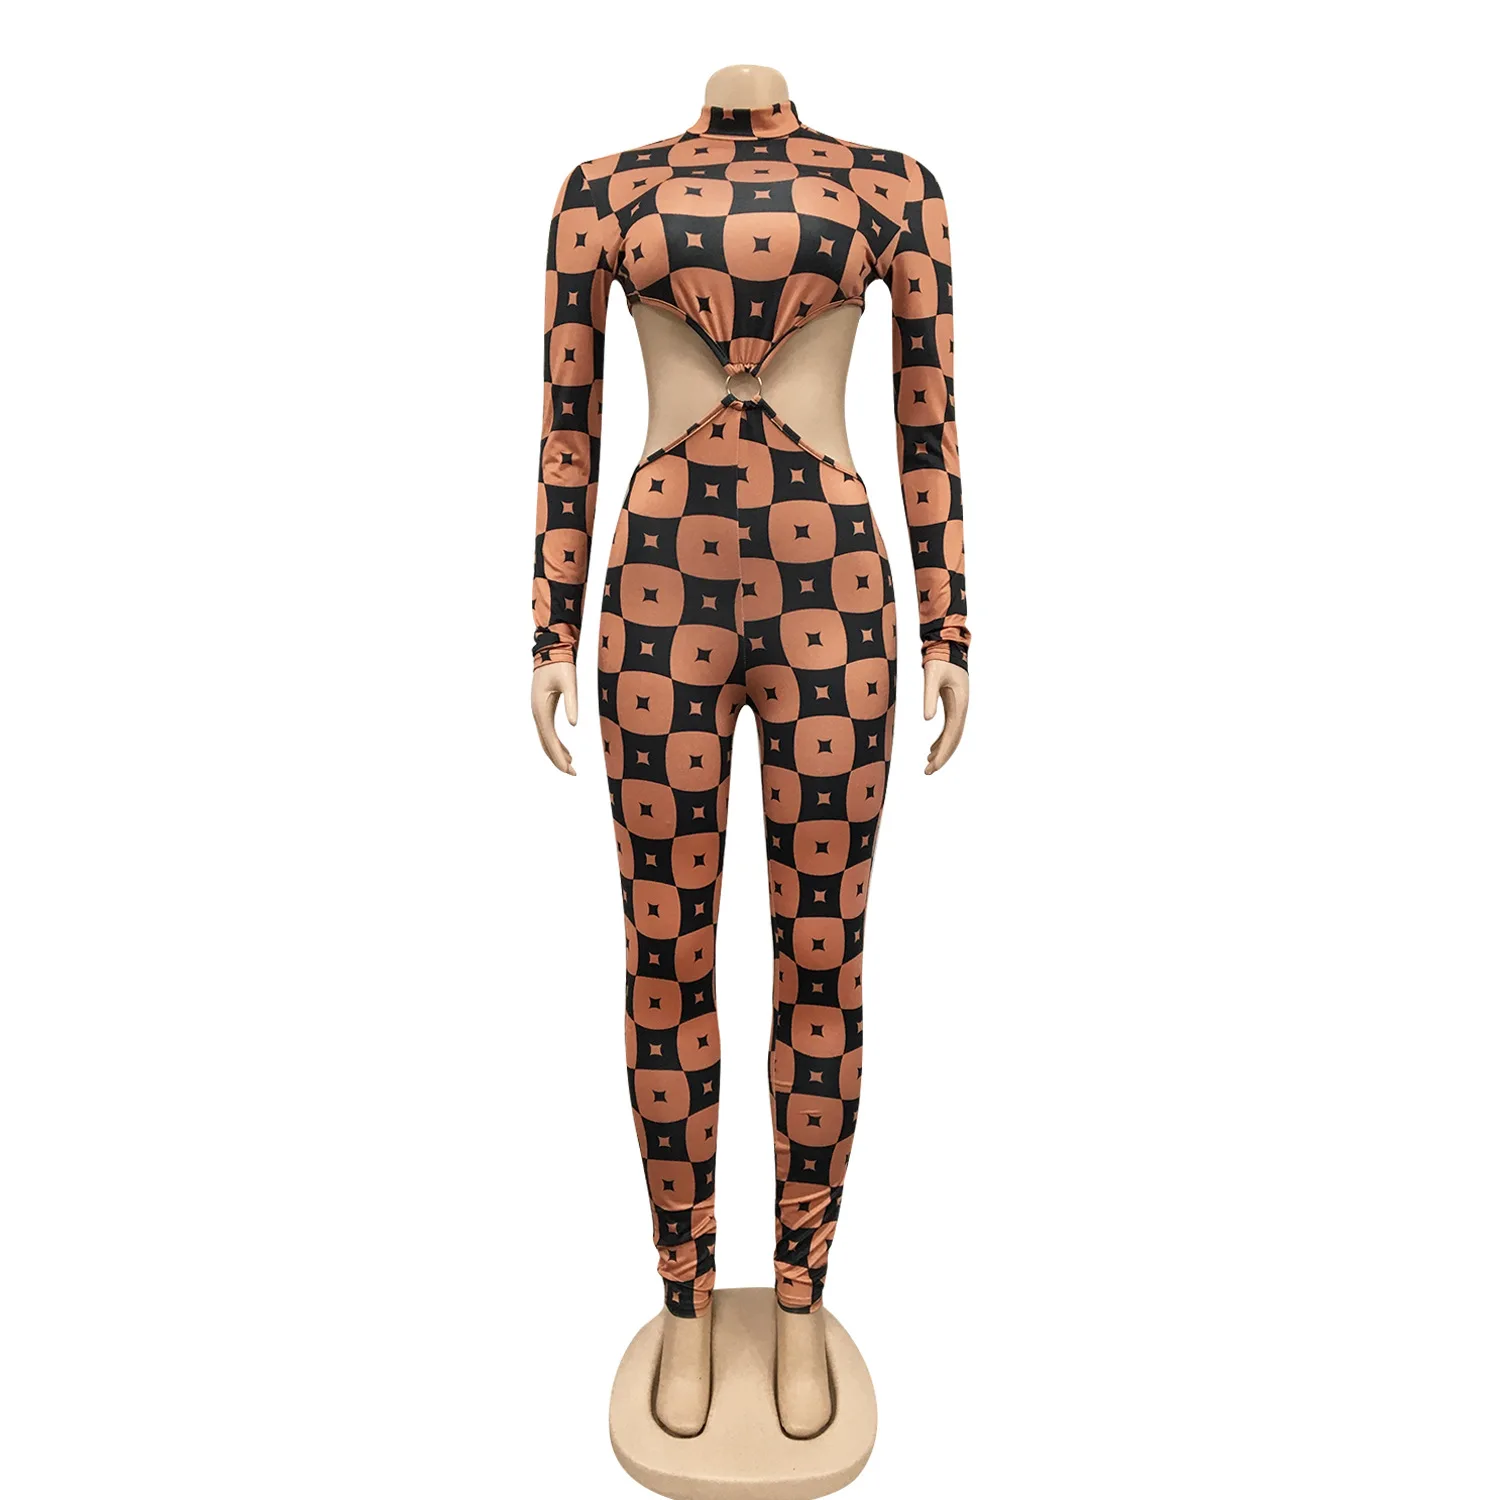 

ANJAMANOR Geometric Print Hollow Out Open Back Long Sleeve Bodycon Jumpsuit Winter 2020 Club Outfits for Women D42-CF29